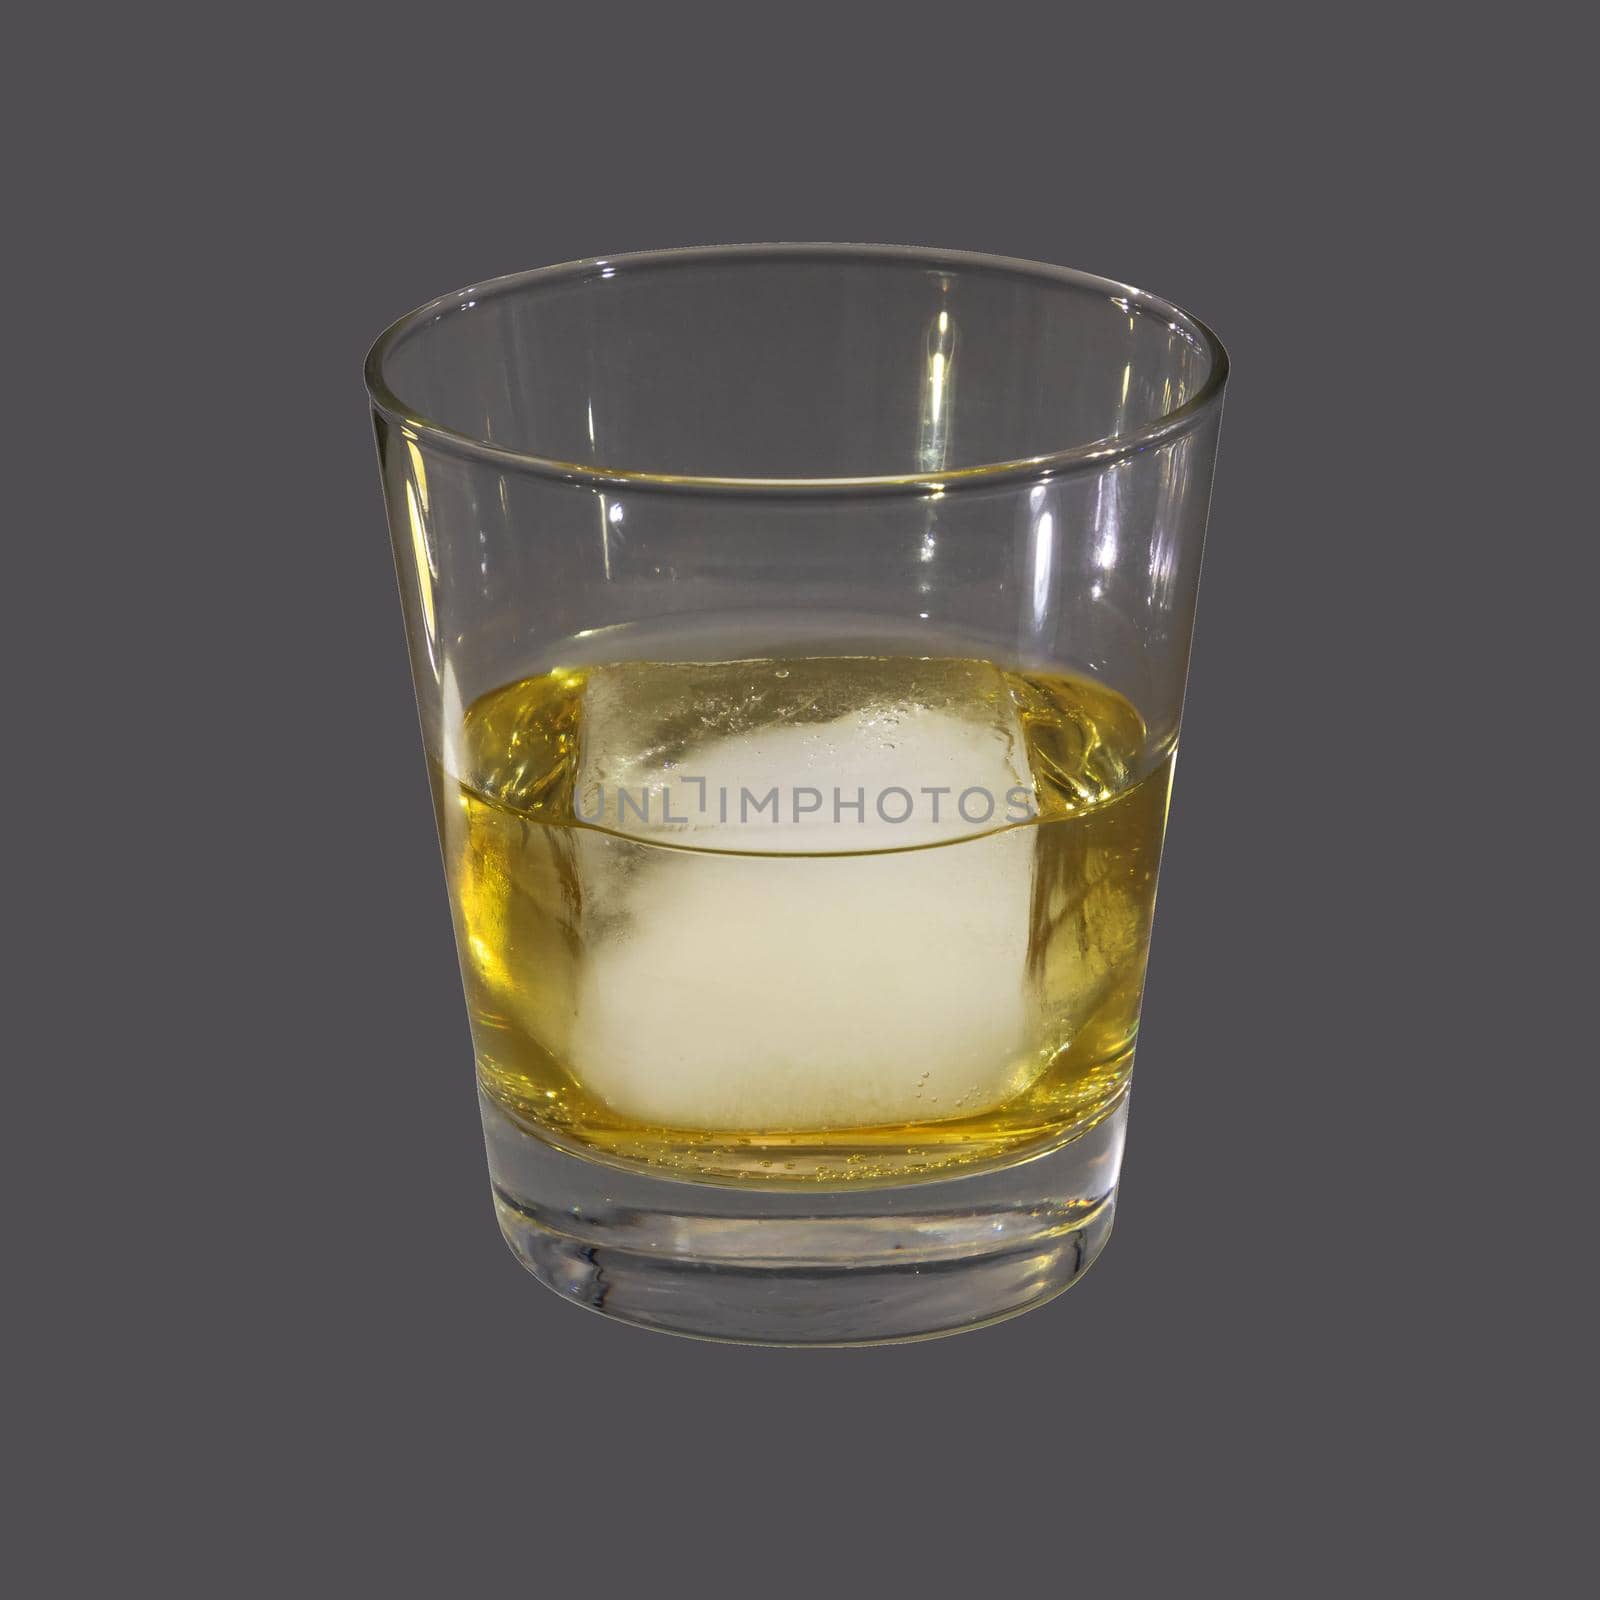 Studio photograph of a glass with an ice cube on grey background